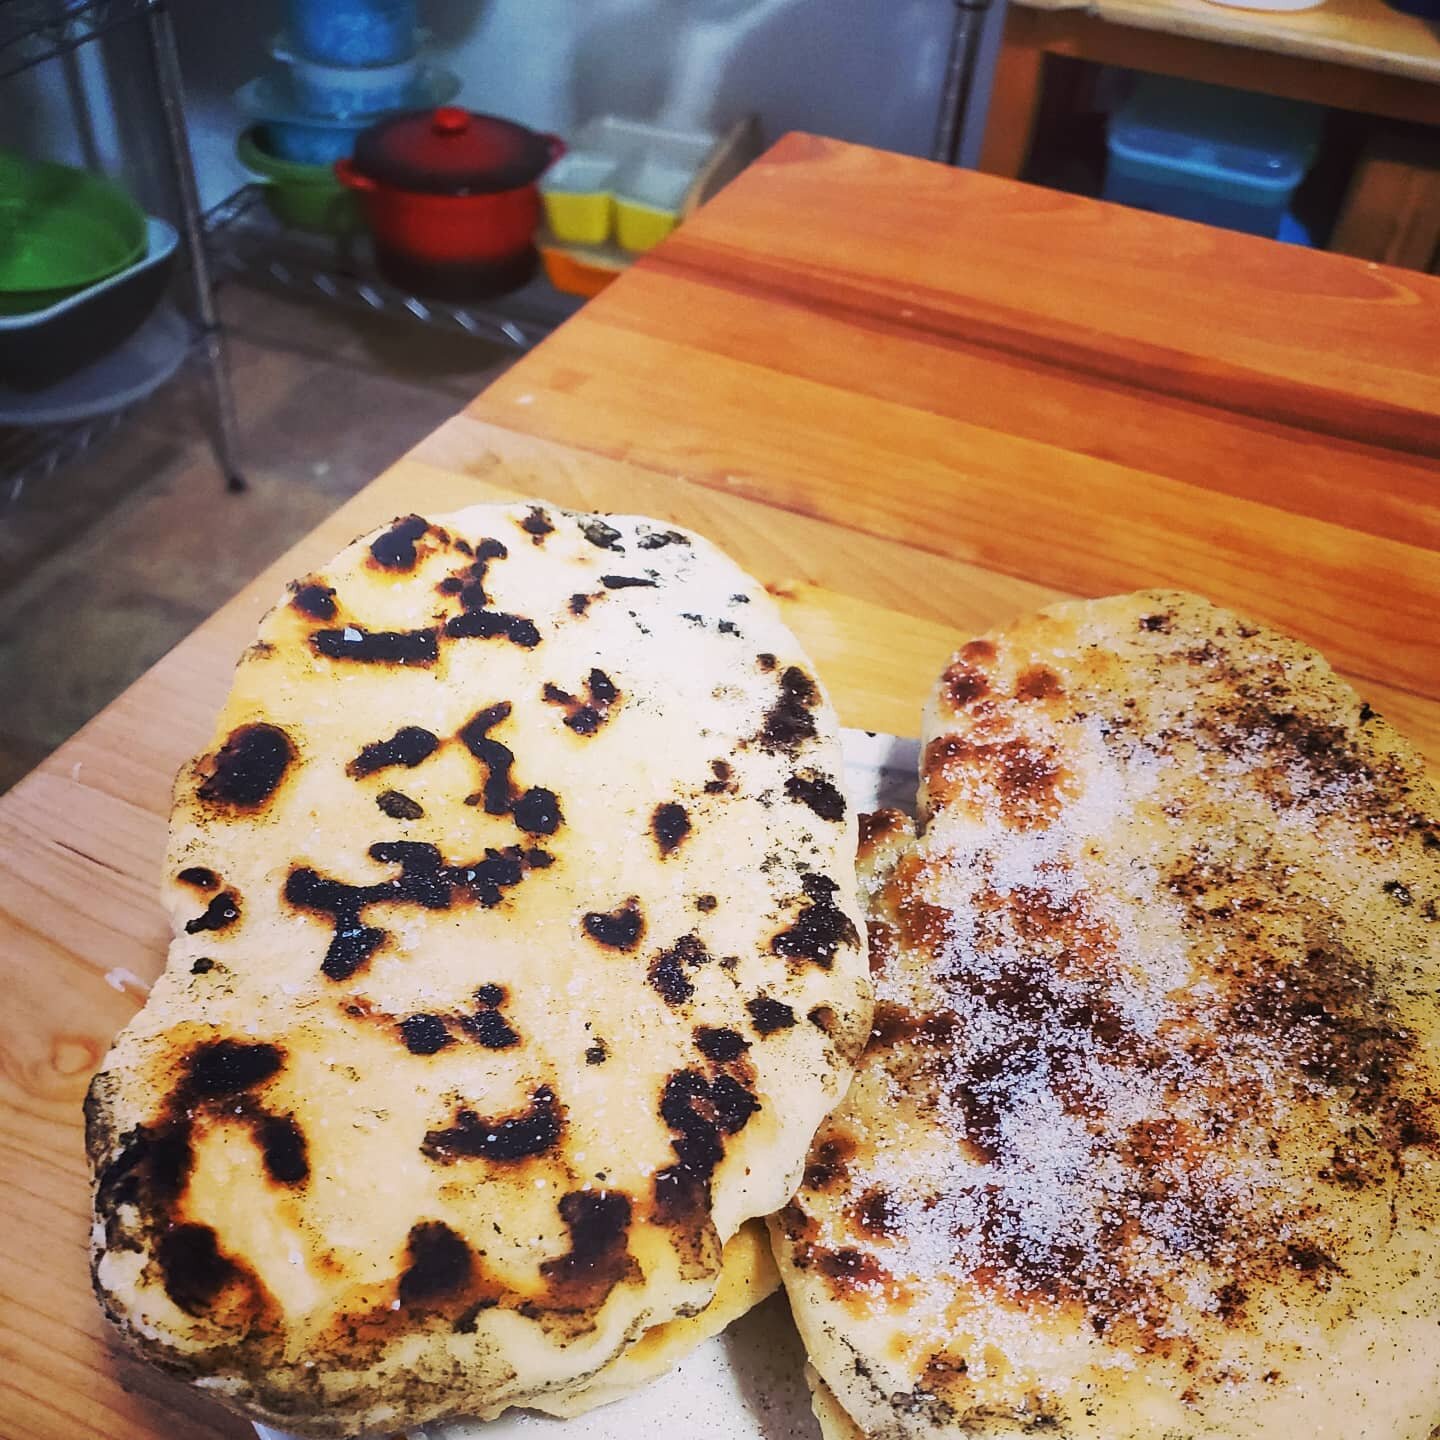 I didn't learn how to do a cooking show in seminary. *
*
#communionbread #communion #virtualcommunion #unitedchurchofchrist #interimministry #interimpastor #frybread